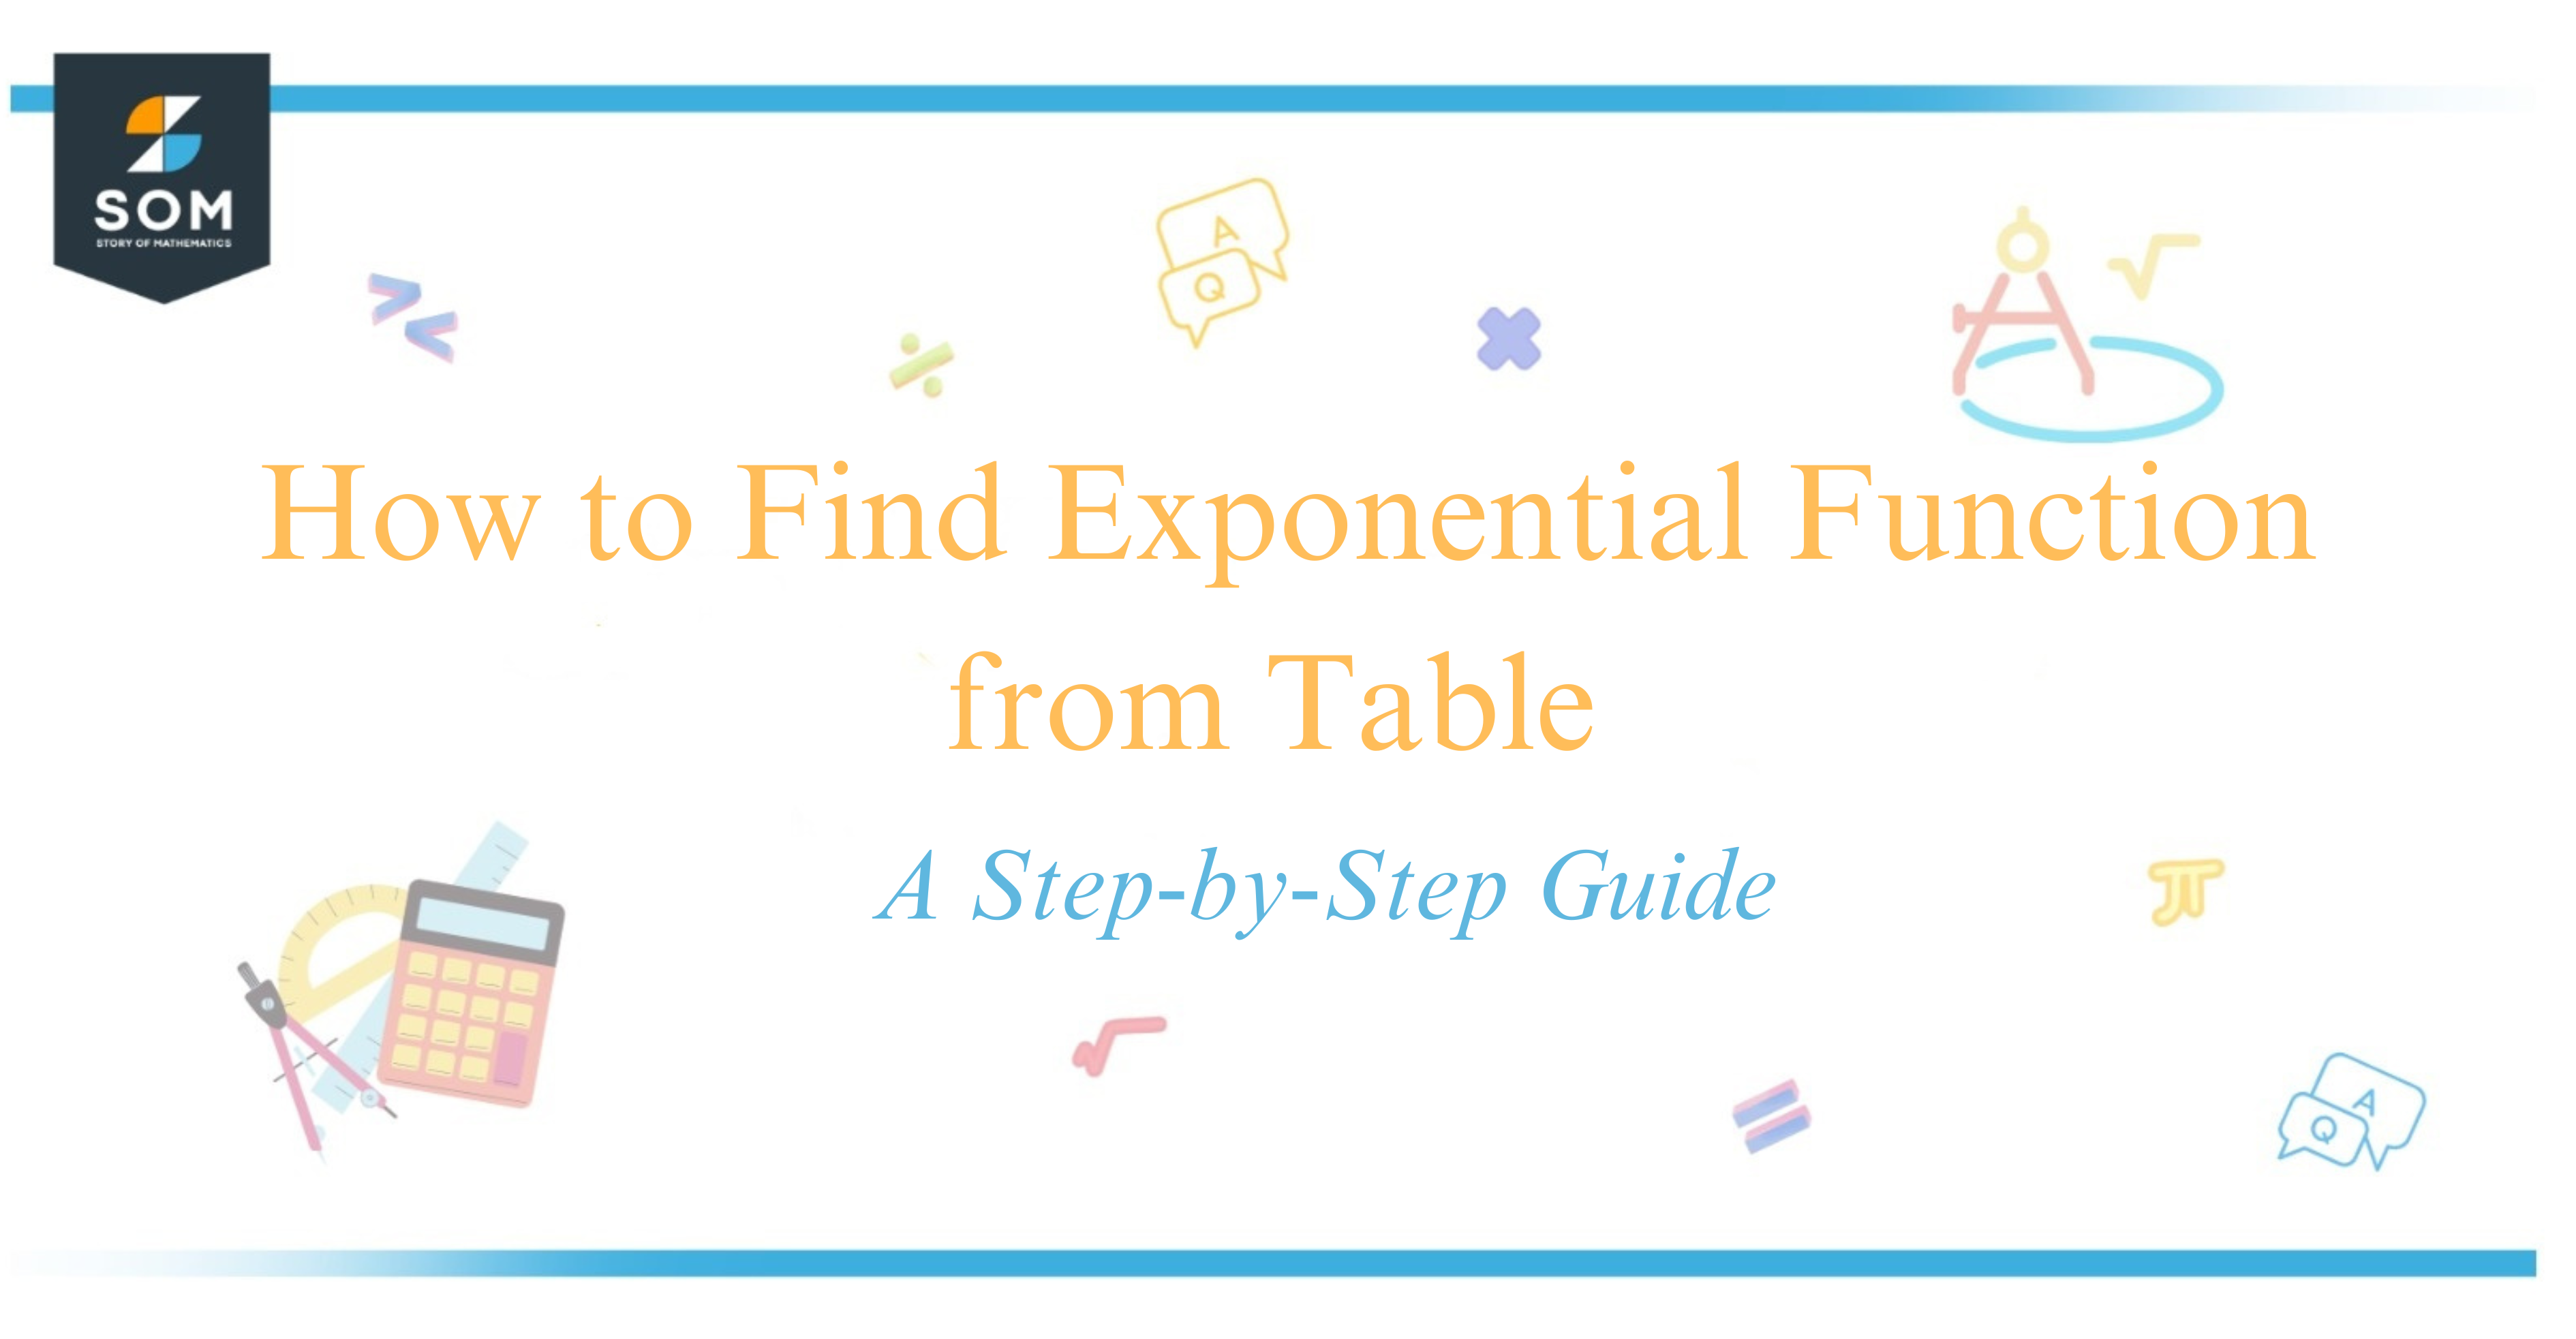 How to Find Exponential Function from Table A Step-by-Step Guide